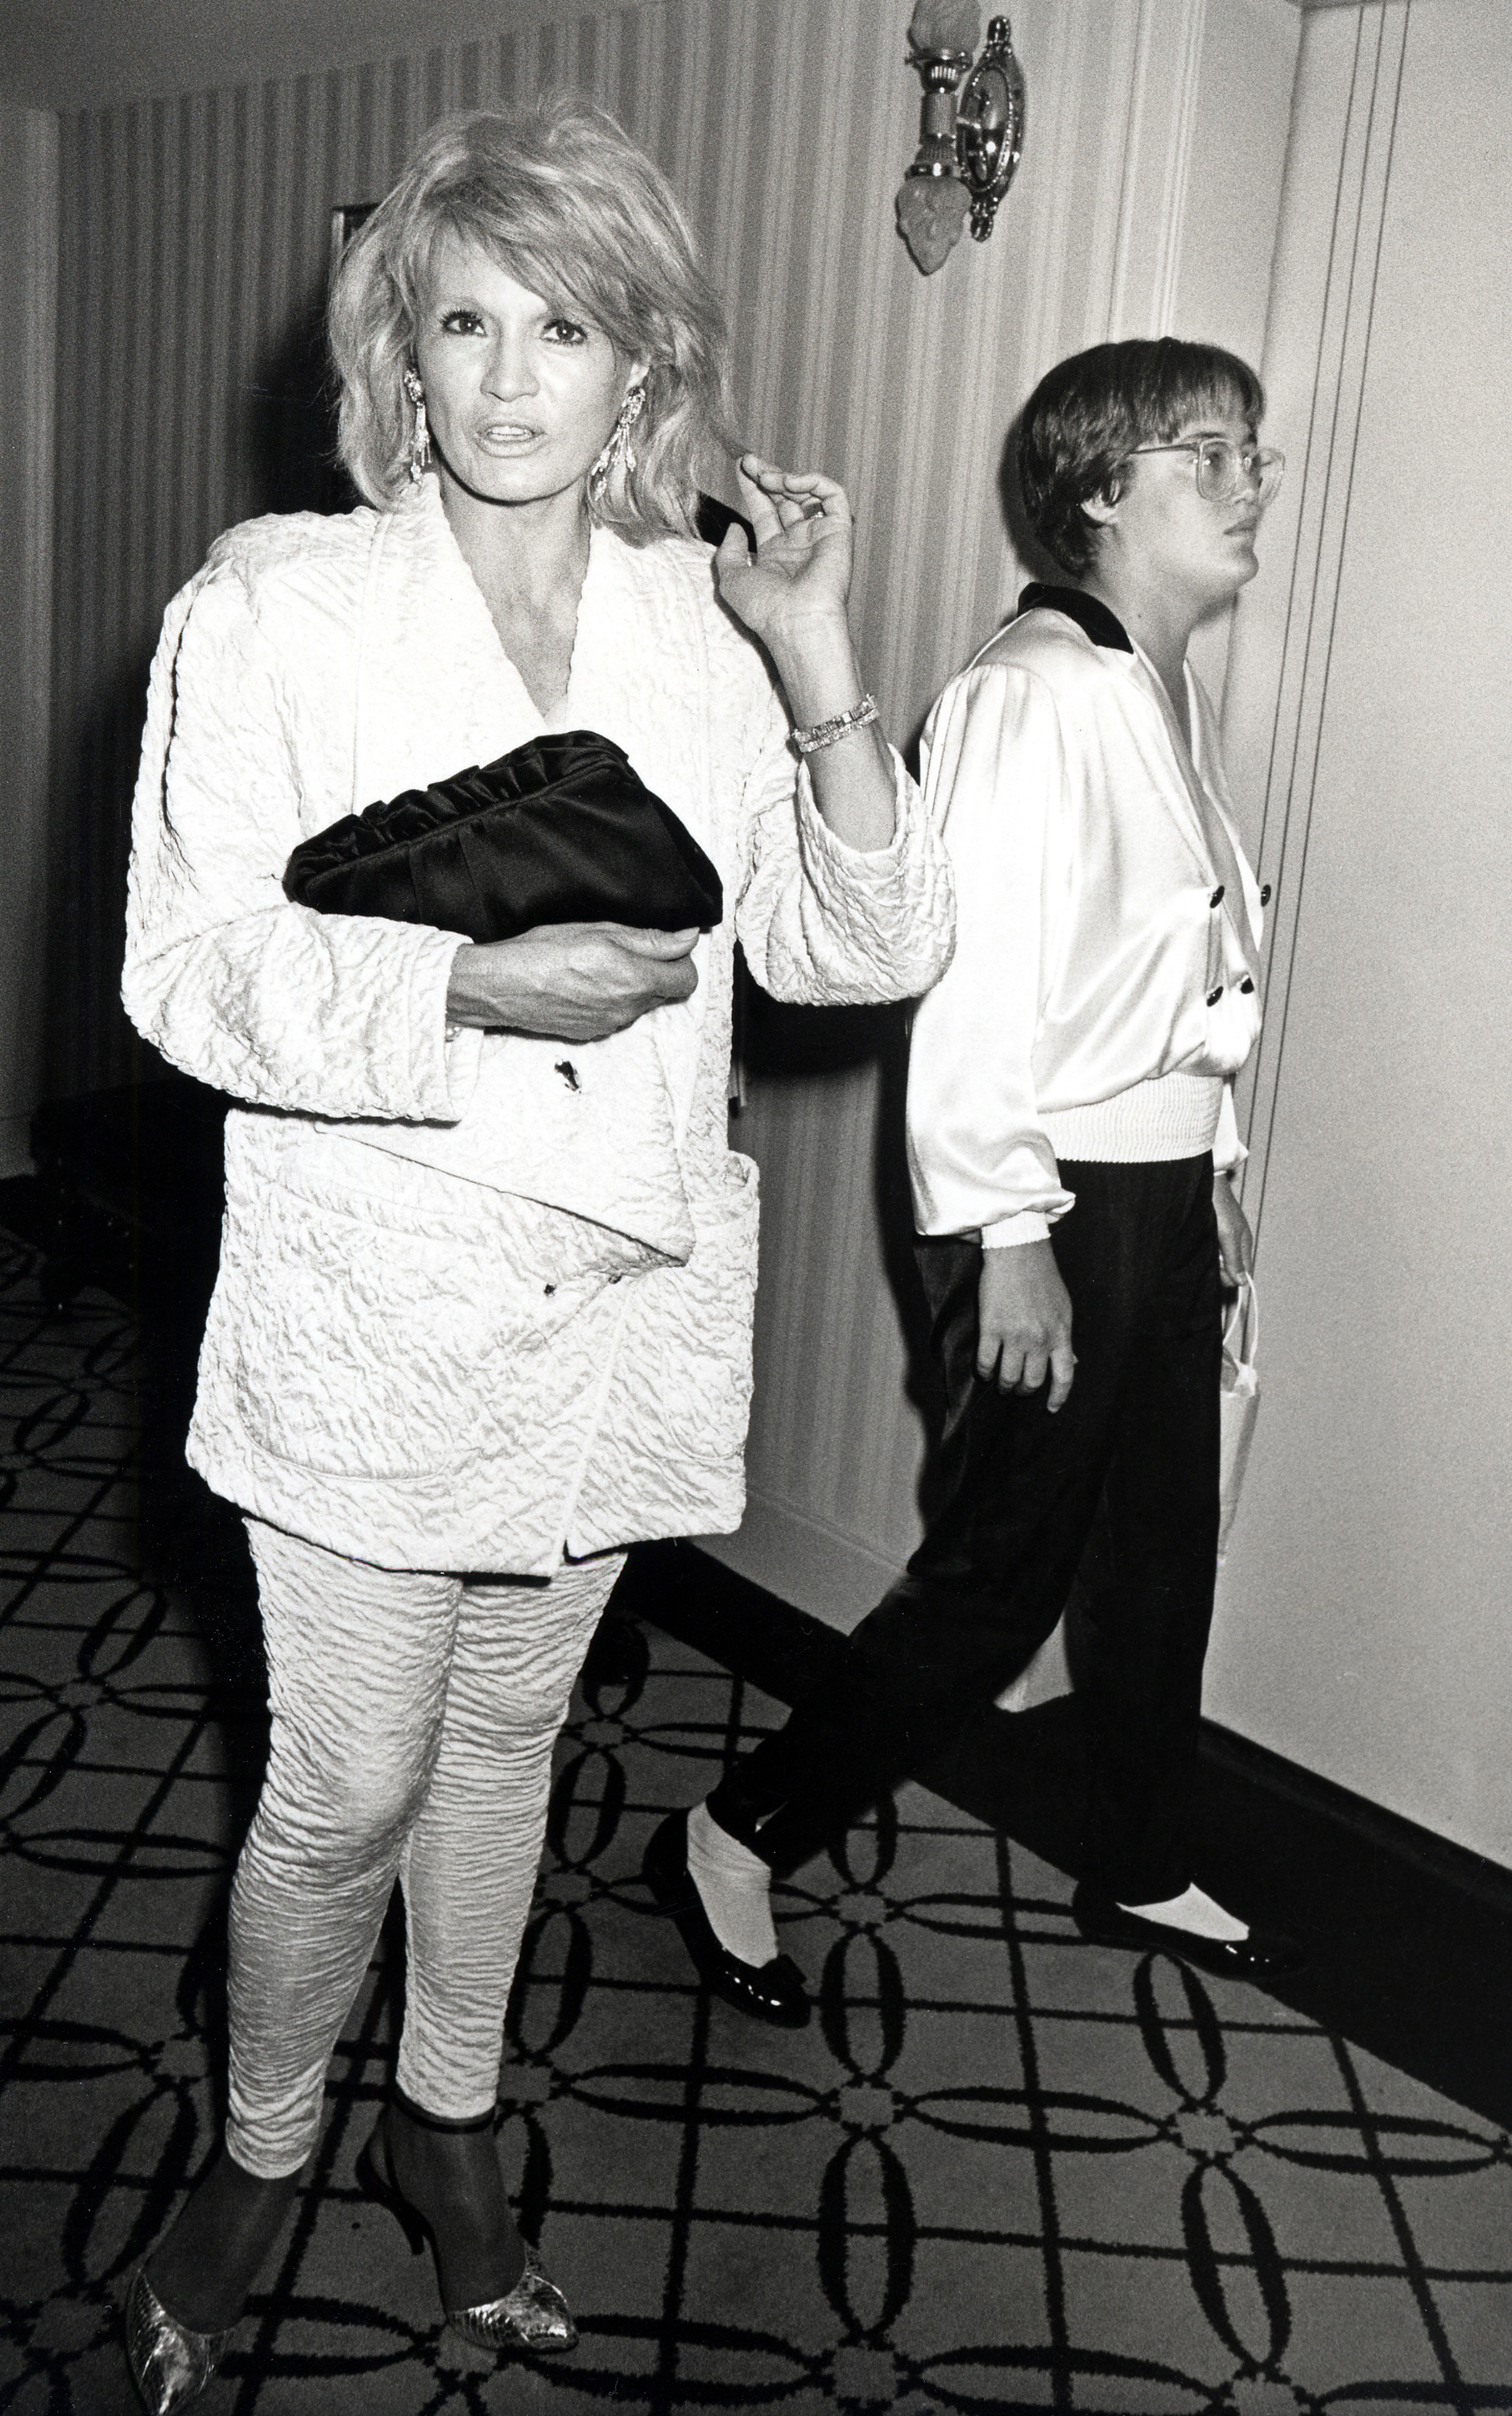 Angie Dickinson and her daughter Nikki Bachrach during New York Friar's Club Roast Honors Roger Moore at Waldorf Astoria on March 17, 1986 in New York City, New York | Source: Getty Images